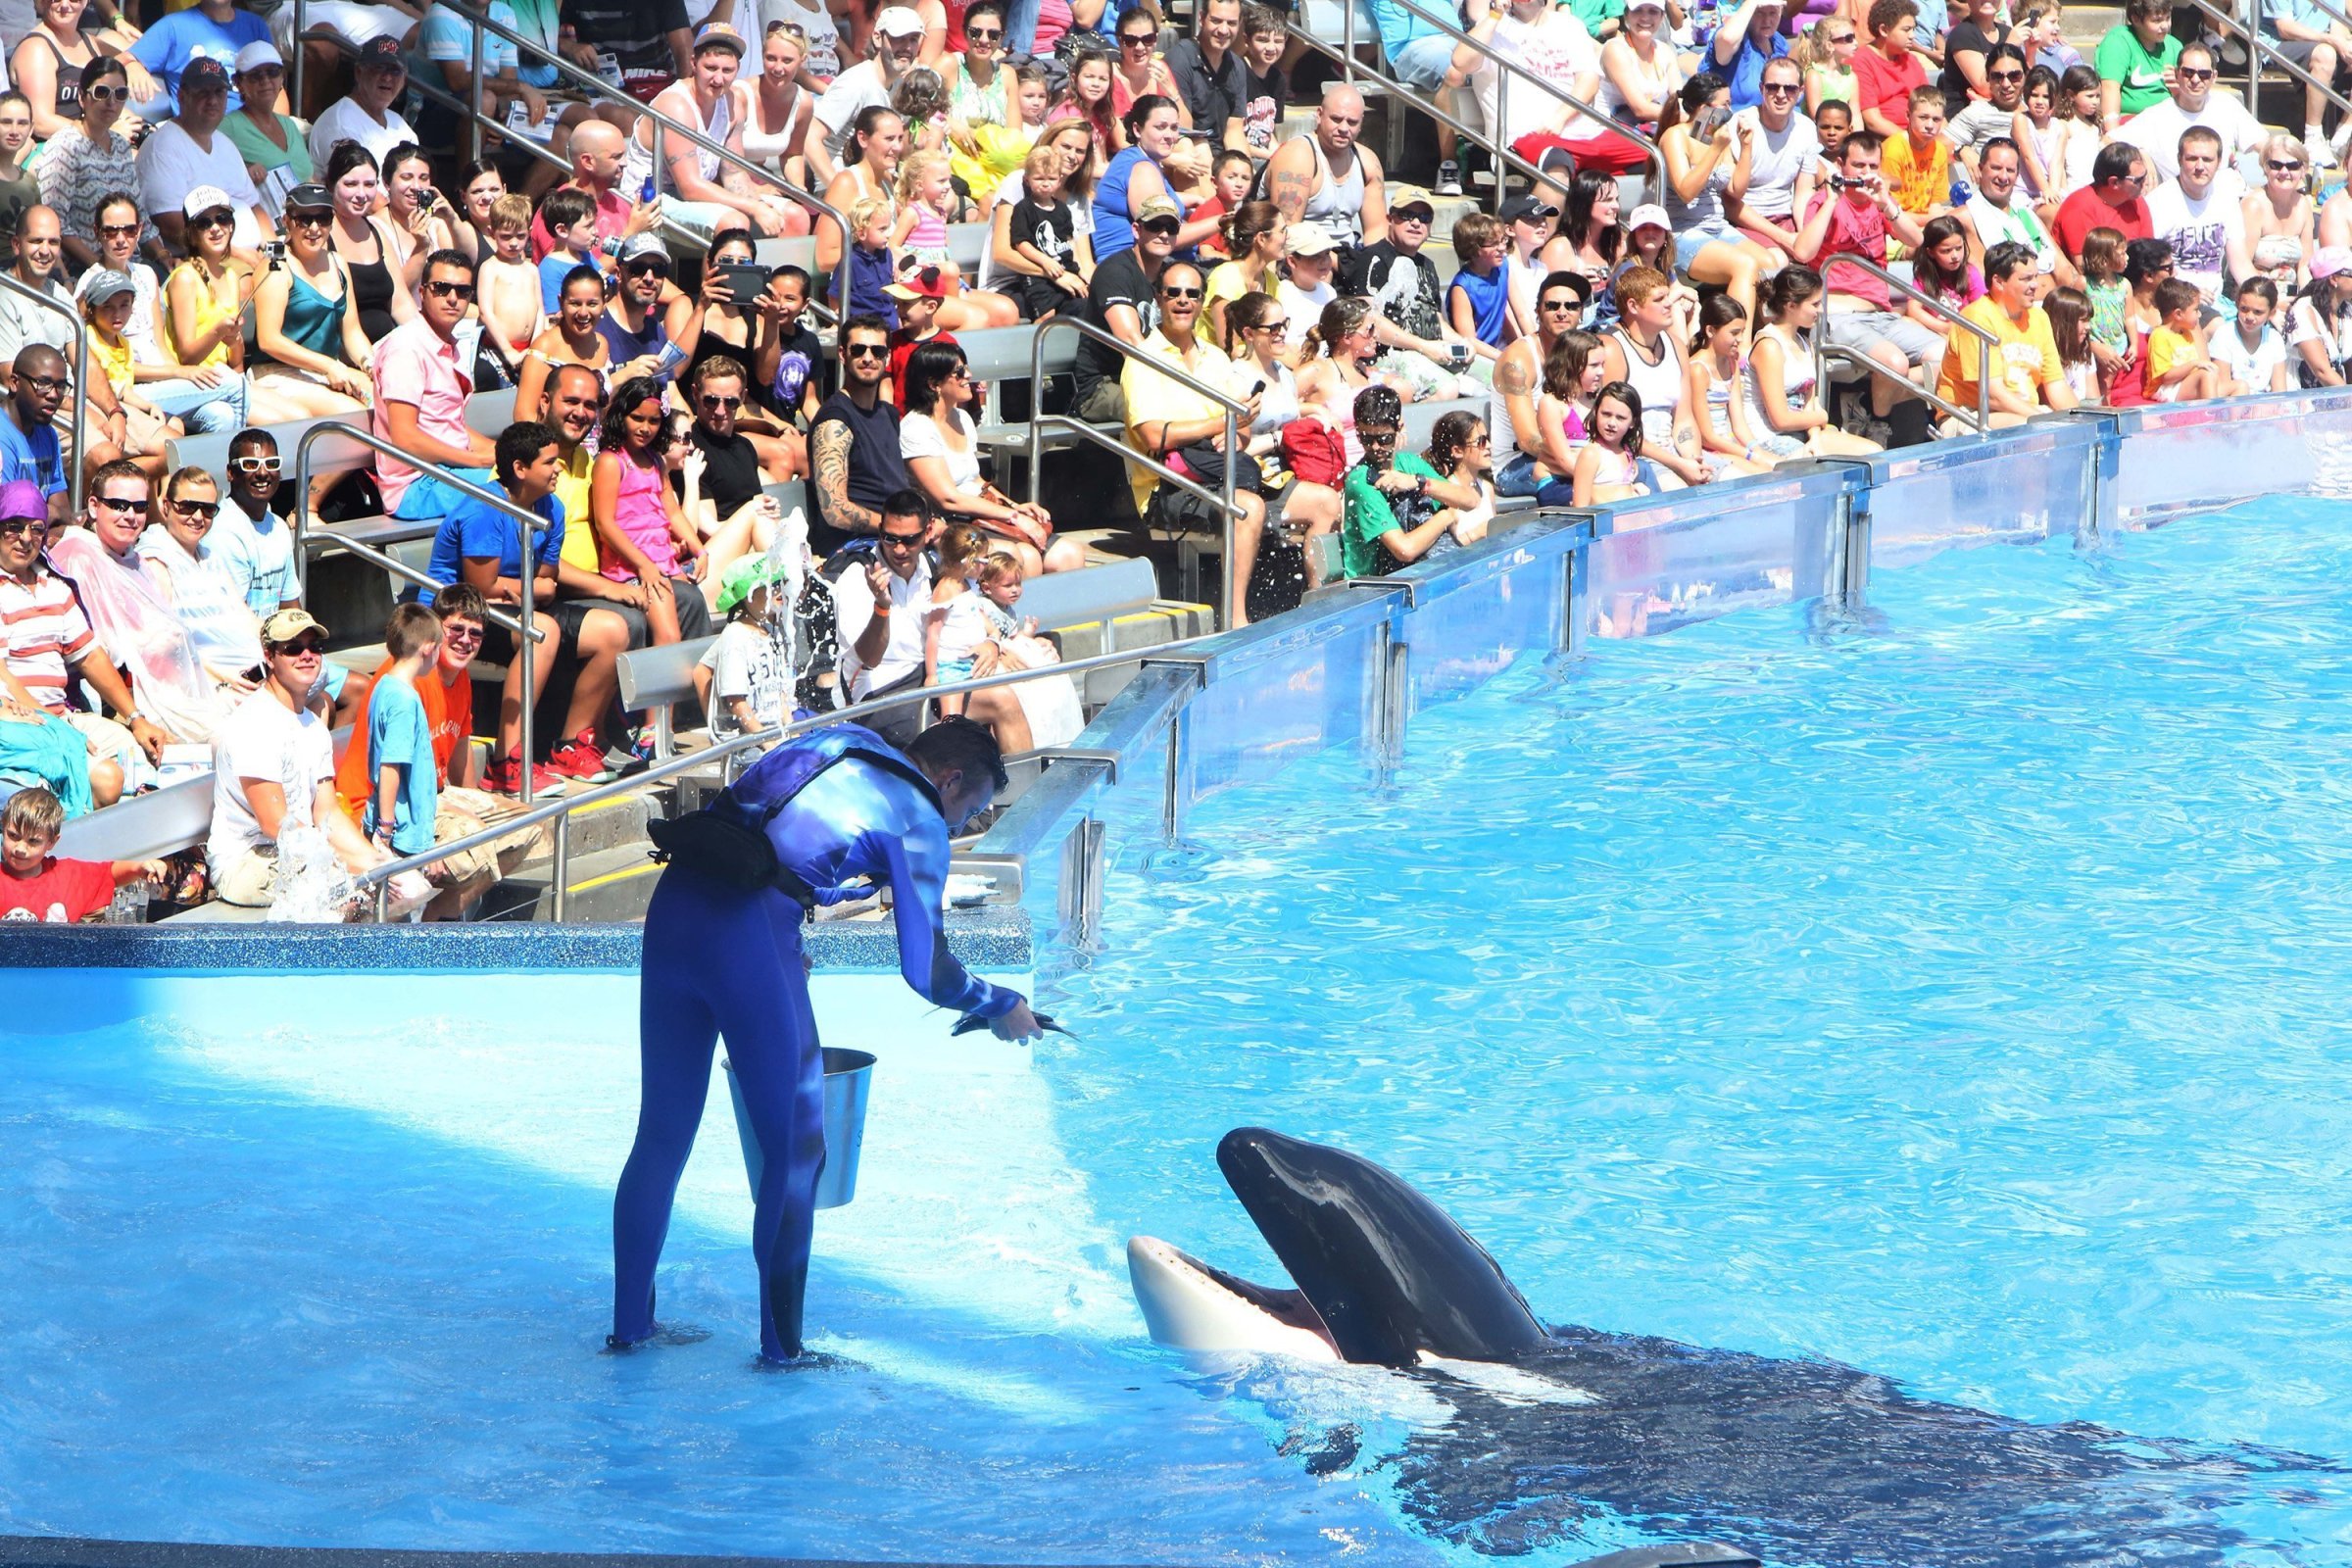 SeaWorld is heavily emphasizing conservation amid controversy over its killer whales.